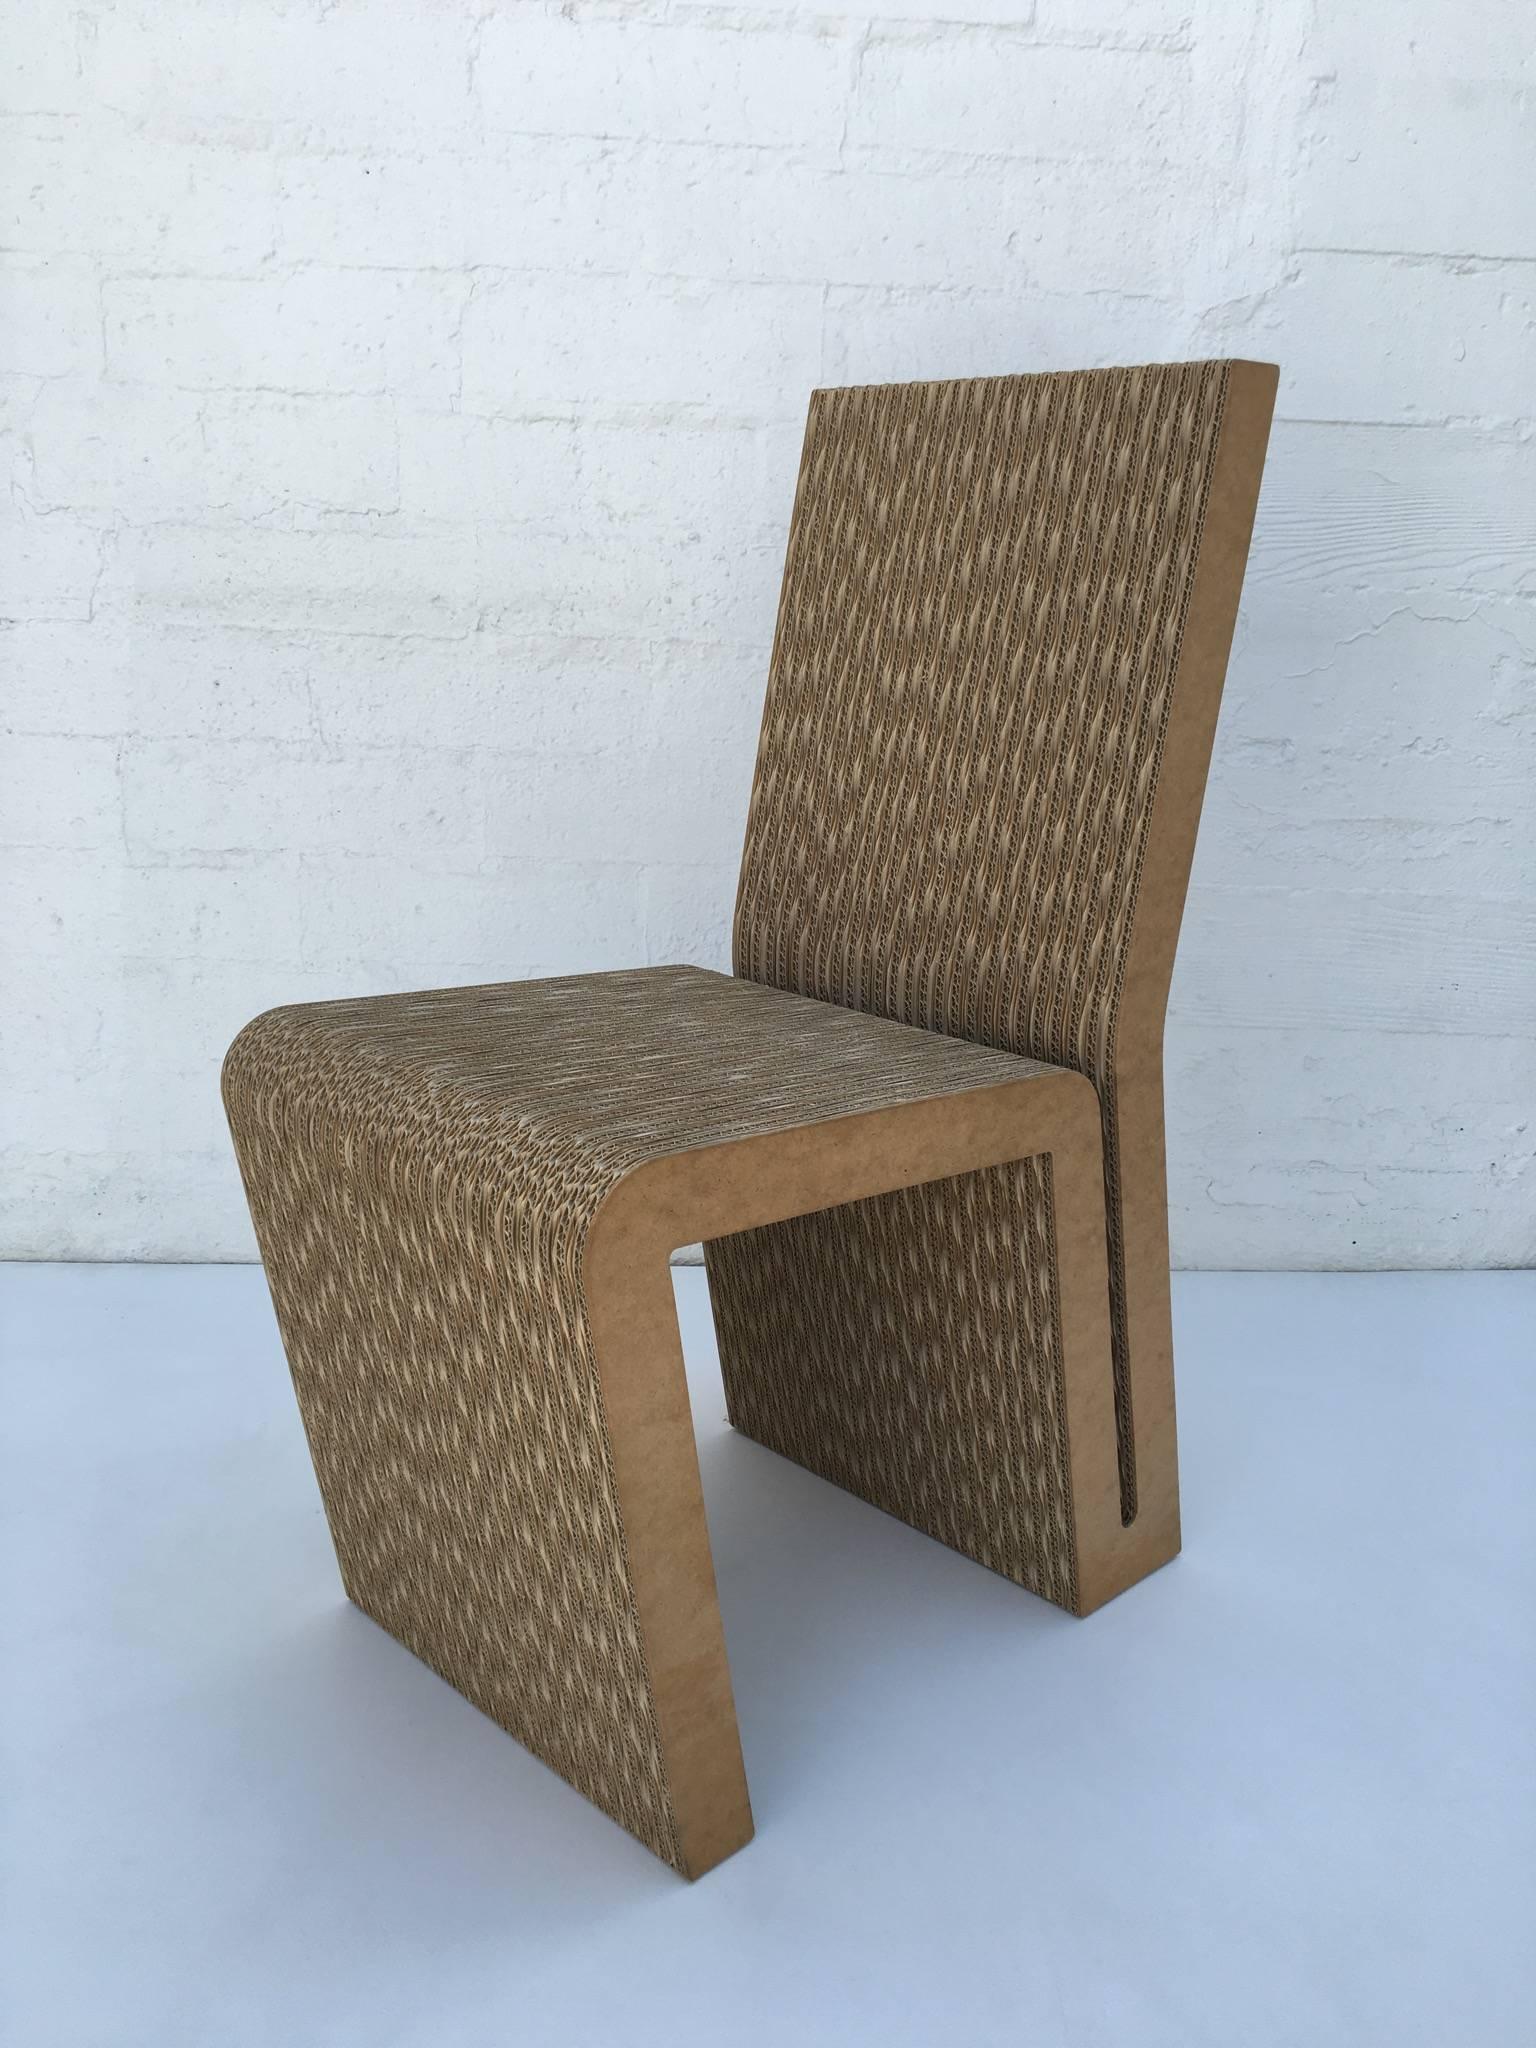 cardboard chairs with dimensions